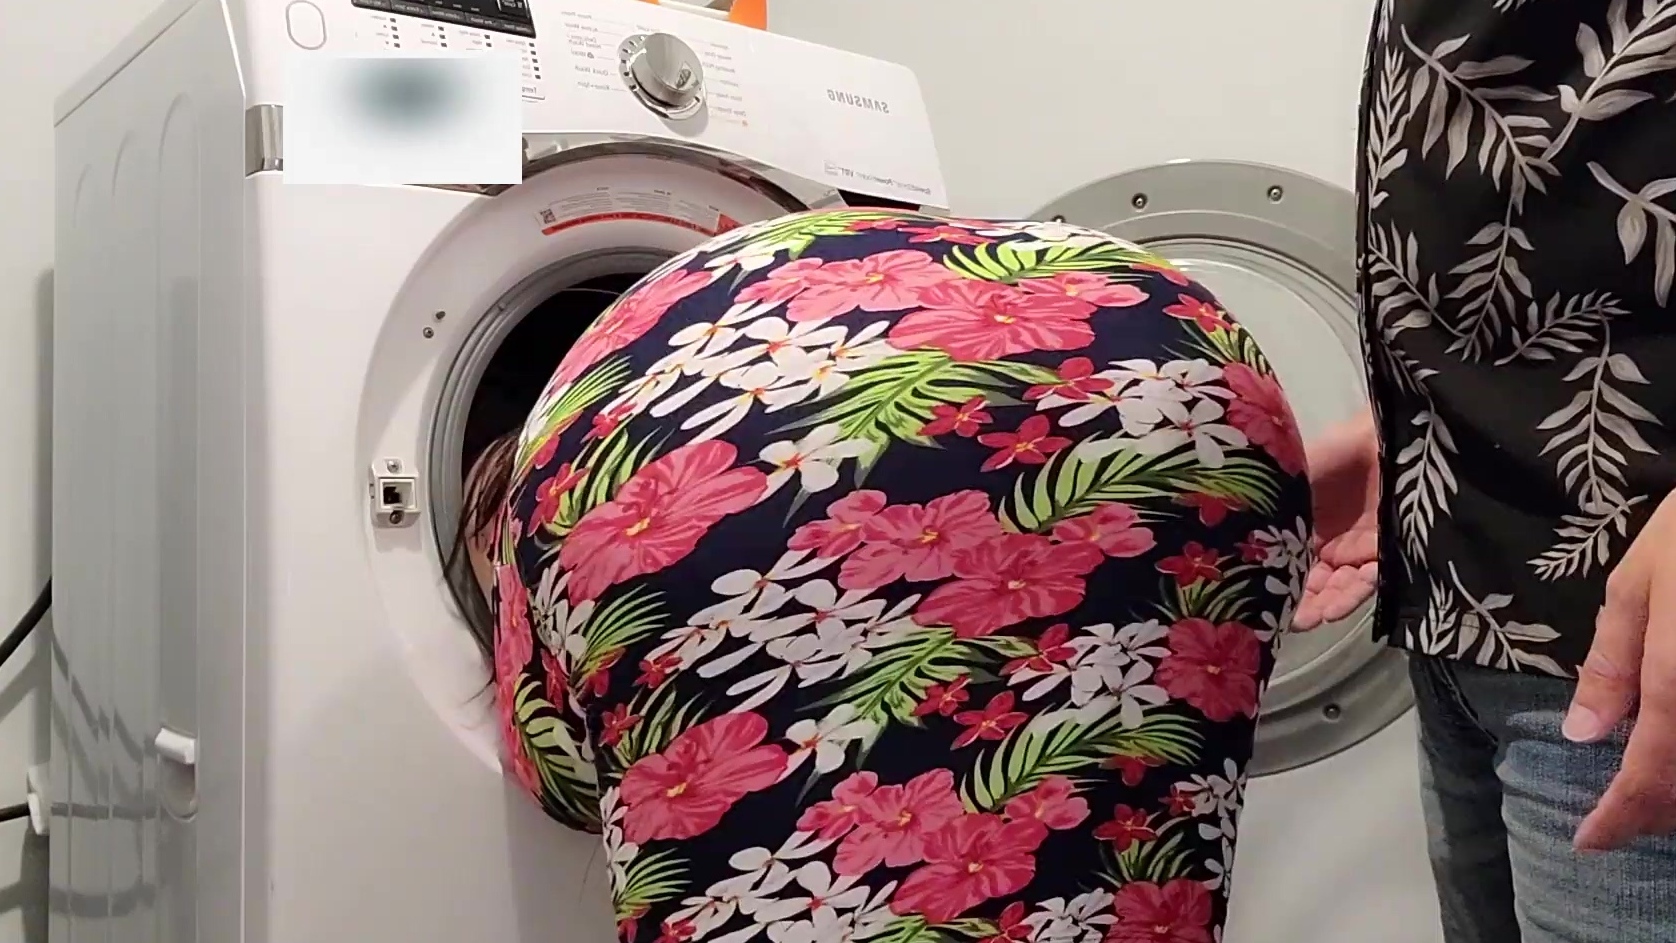 Japanese Mom Pussy While Washing Clothes - Bitch with huge Ass stuck in washing machine! Perv stepson sprayed cum all  over her Ass